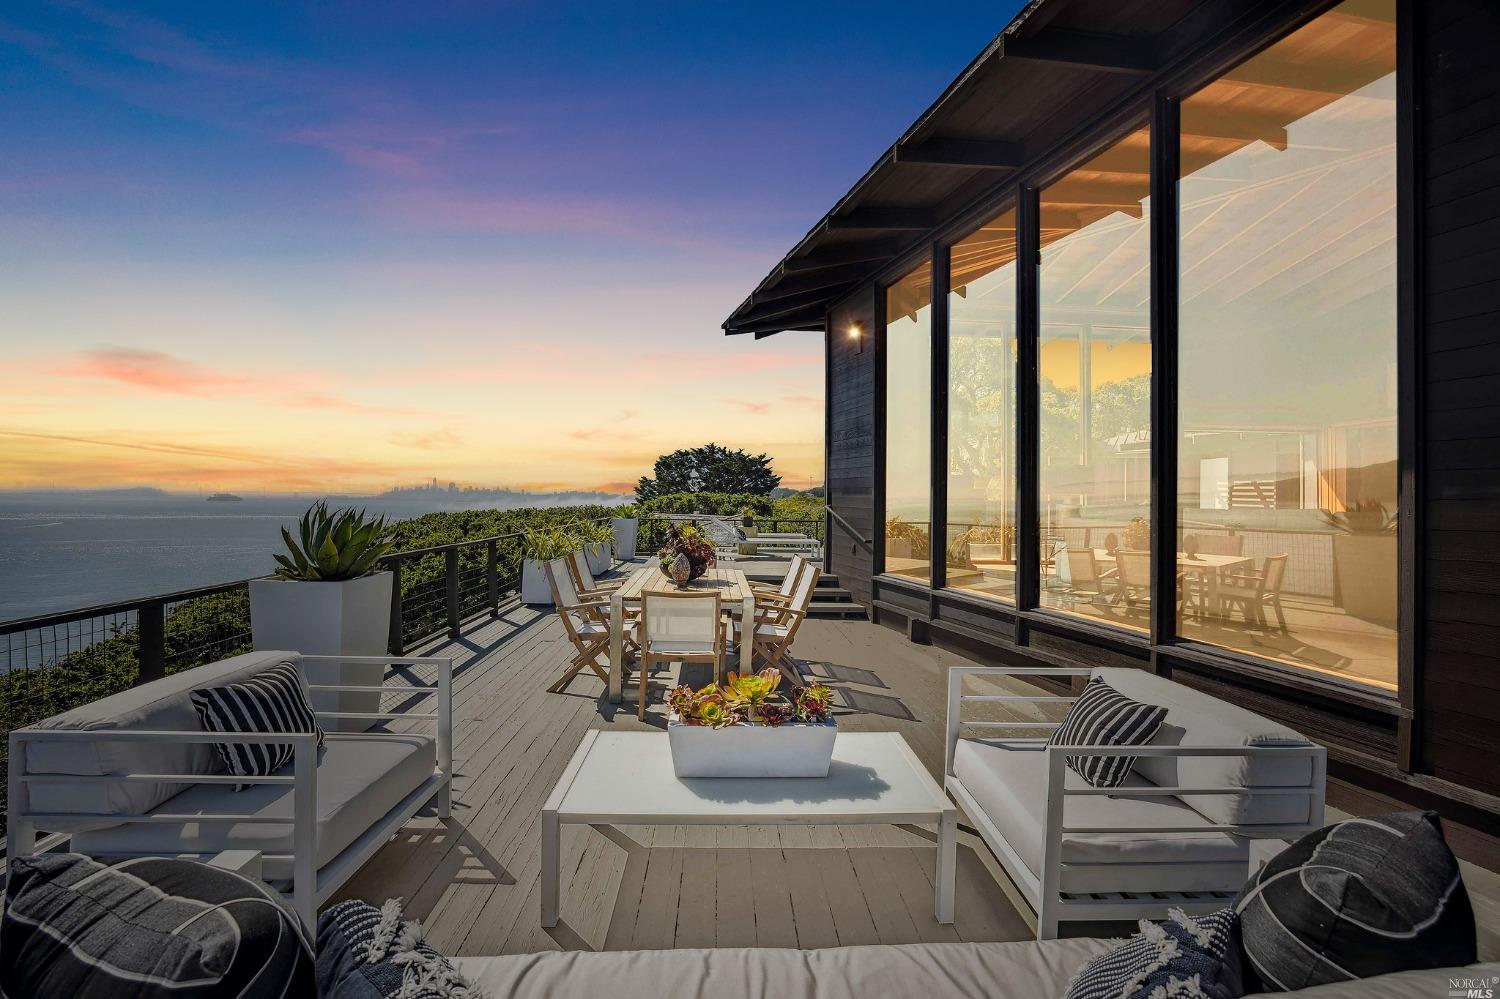 This property in Sausalito offers awe-inspiring views of San Francisco and the Bay. The home was custom-built with superior attention to detail, featuring unique and beautiful woodwork throughout the entire property. The 11' height floor-to-ceiling windows in the living room on three sides will mesmerize with completely unobstructed views of more than 180. Stay cozy with dual-zone radiant floor heating emanating from the tile floors. The main house is on two floors and is served by an interior elevator when convenience is desired. Two large wood pocket slider doors with separate screens and louvered sliders make it easy to move between indoor and outdoor spaces. And then you have the wrap-around deck, it overlooks the Bay and San Francisco and is ideal for relaxing in the sun. The swimming pool provides a refreshing escape during warm weather, while the updated kitchen awaits your creativity with its inspiring views. The main property has two bedrooms and two full baths, providing ample space to unwind. Additional space is provided with the separate legal loft studio apartment and attached deck. This home has cinema-graphic history too, as a backdrop for a film w/Angie Dickinson in 1973. Property website available for incomparable visuals and greater information.